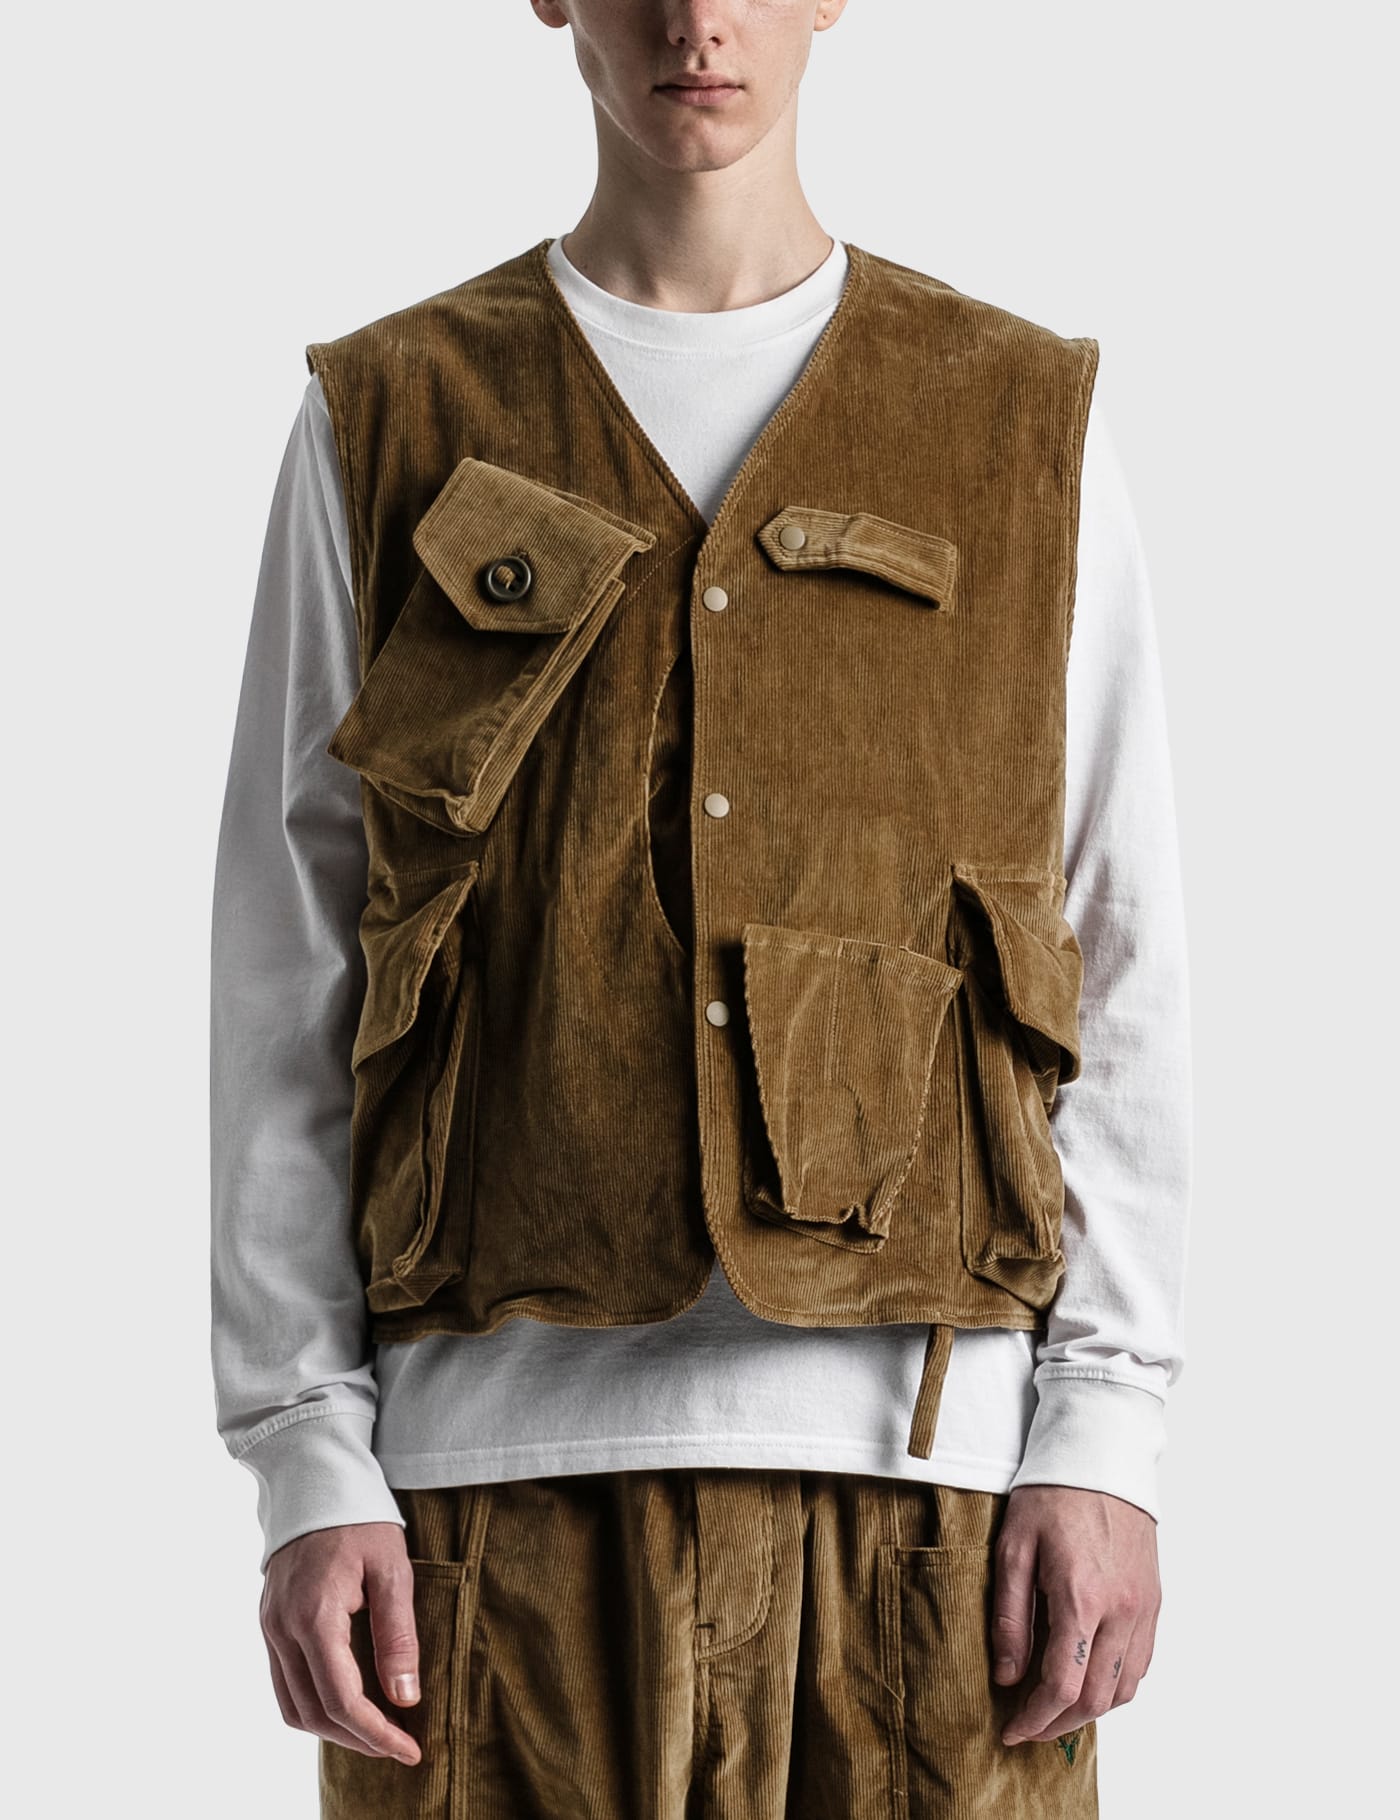 South2 West8 - Corduroy Tenkara Vest | HBX - Globally Curated 